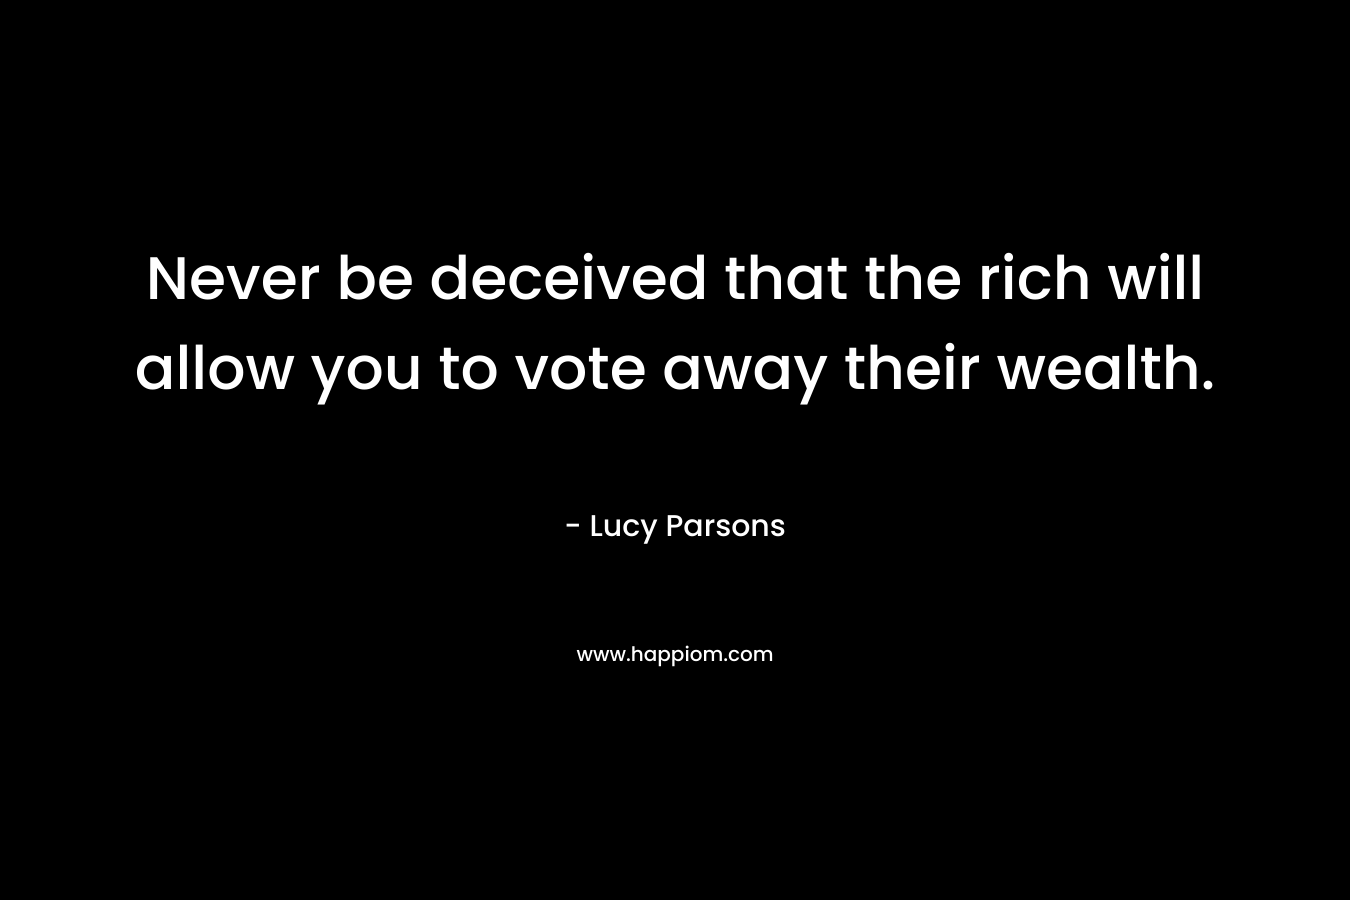 Never be deceived that the rich will allow you to vote away their wealth.